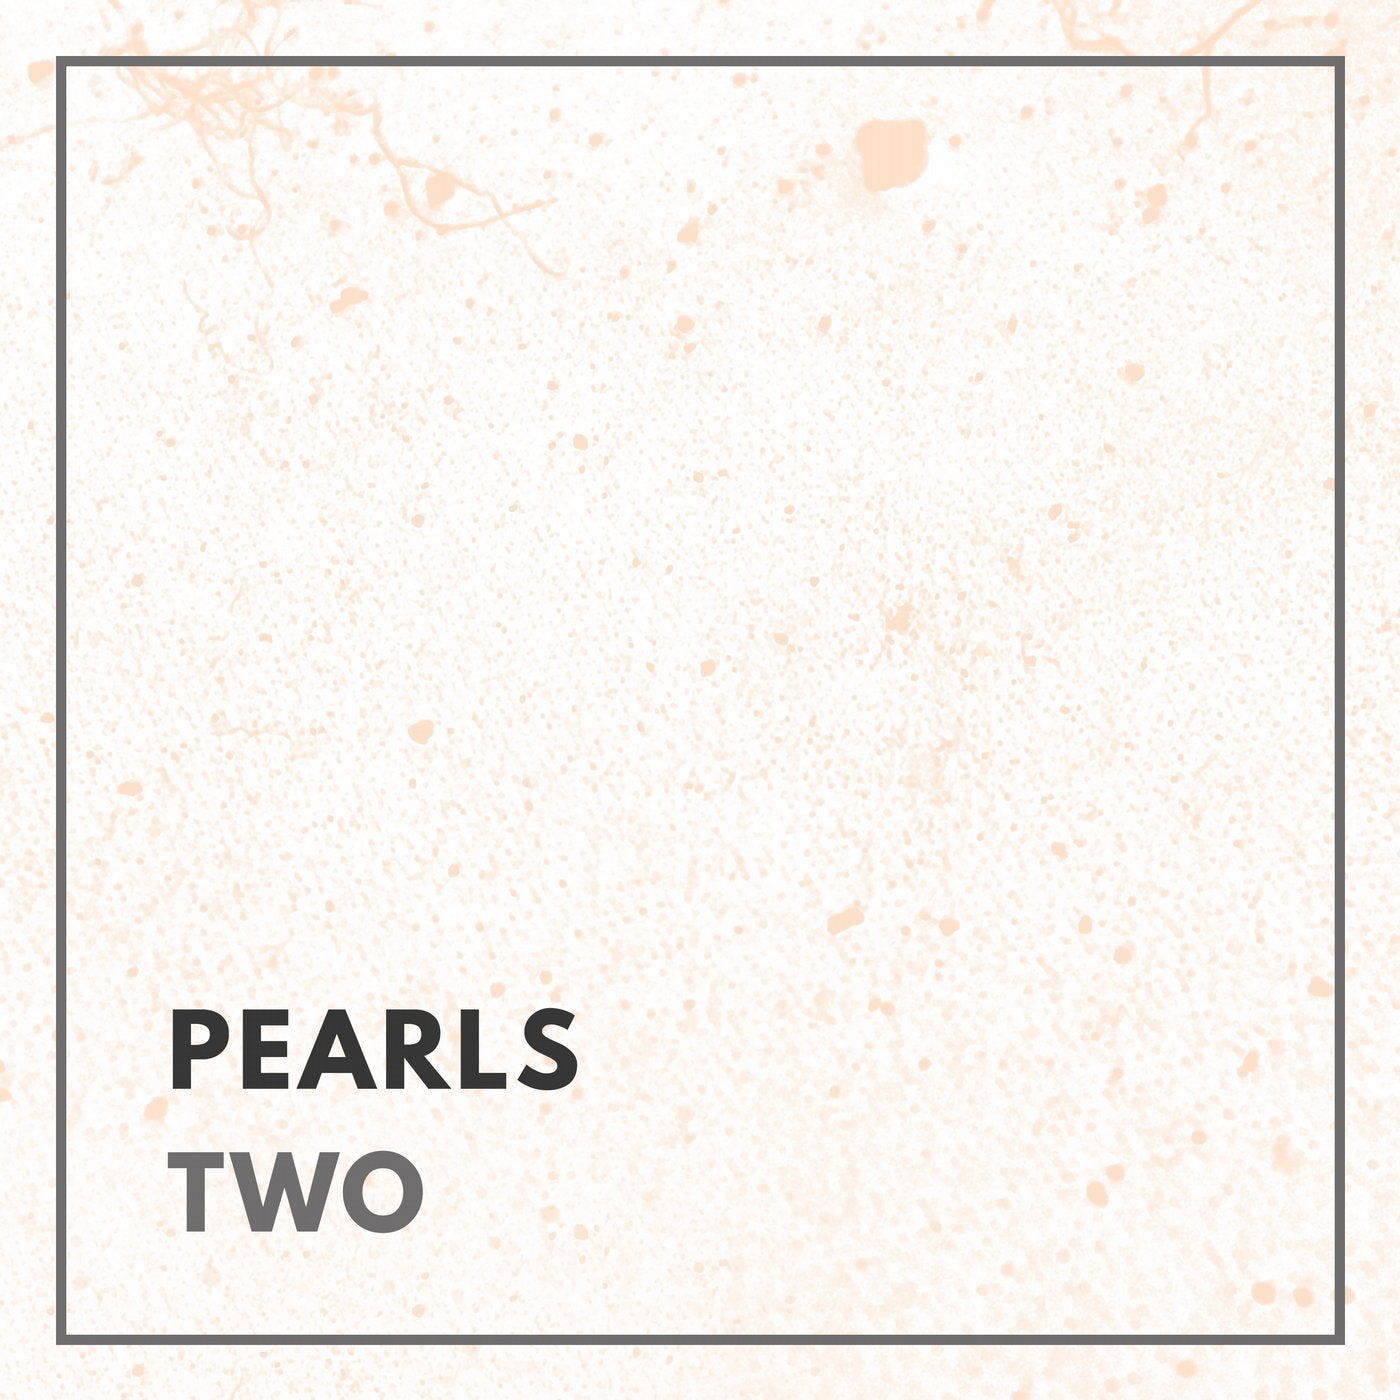 Pearls - Two